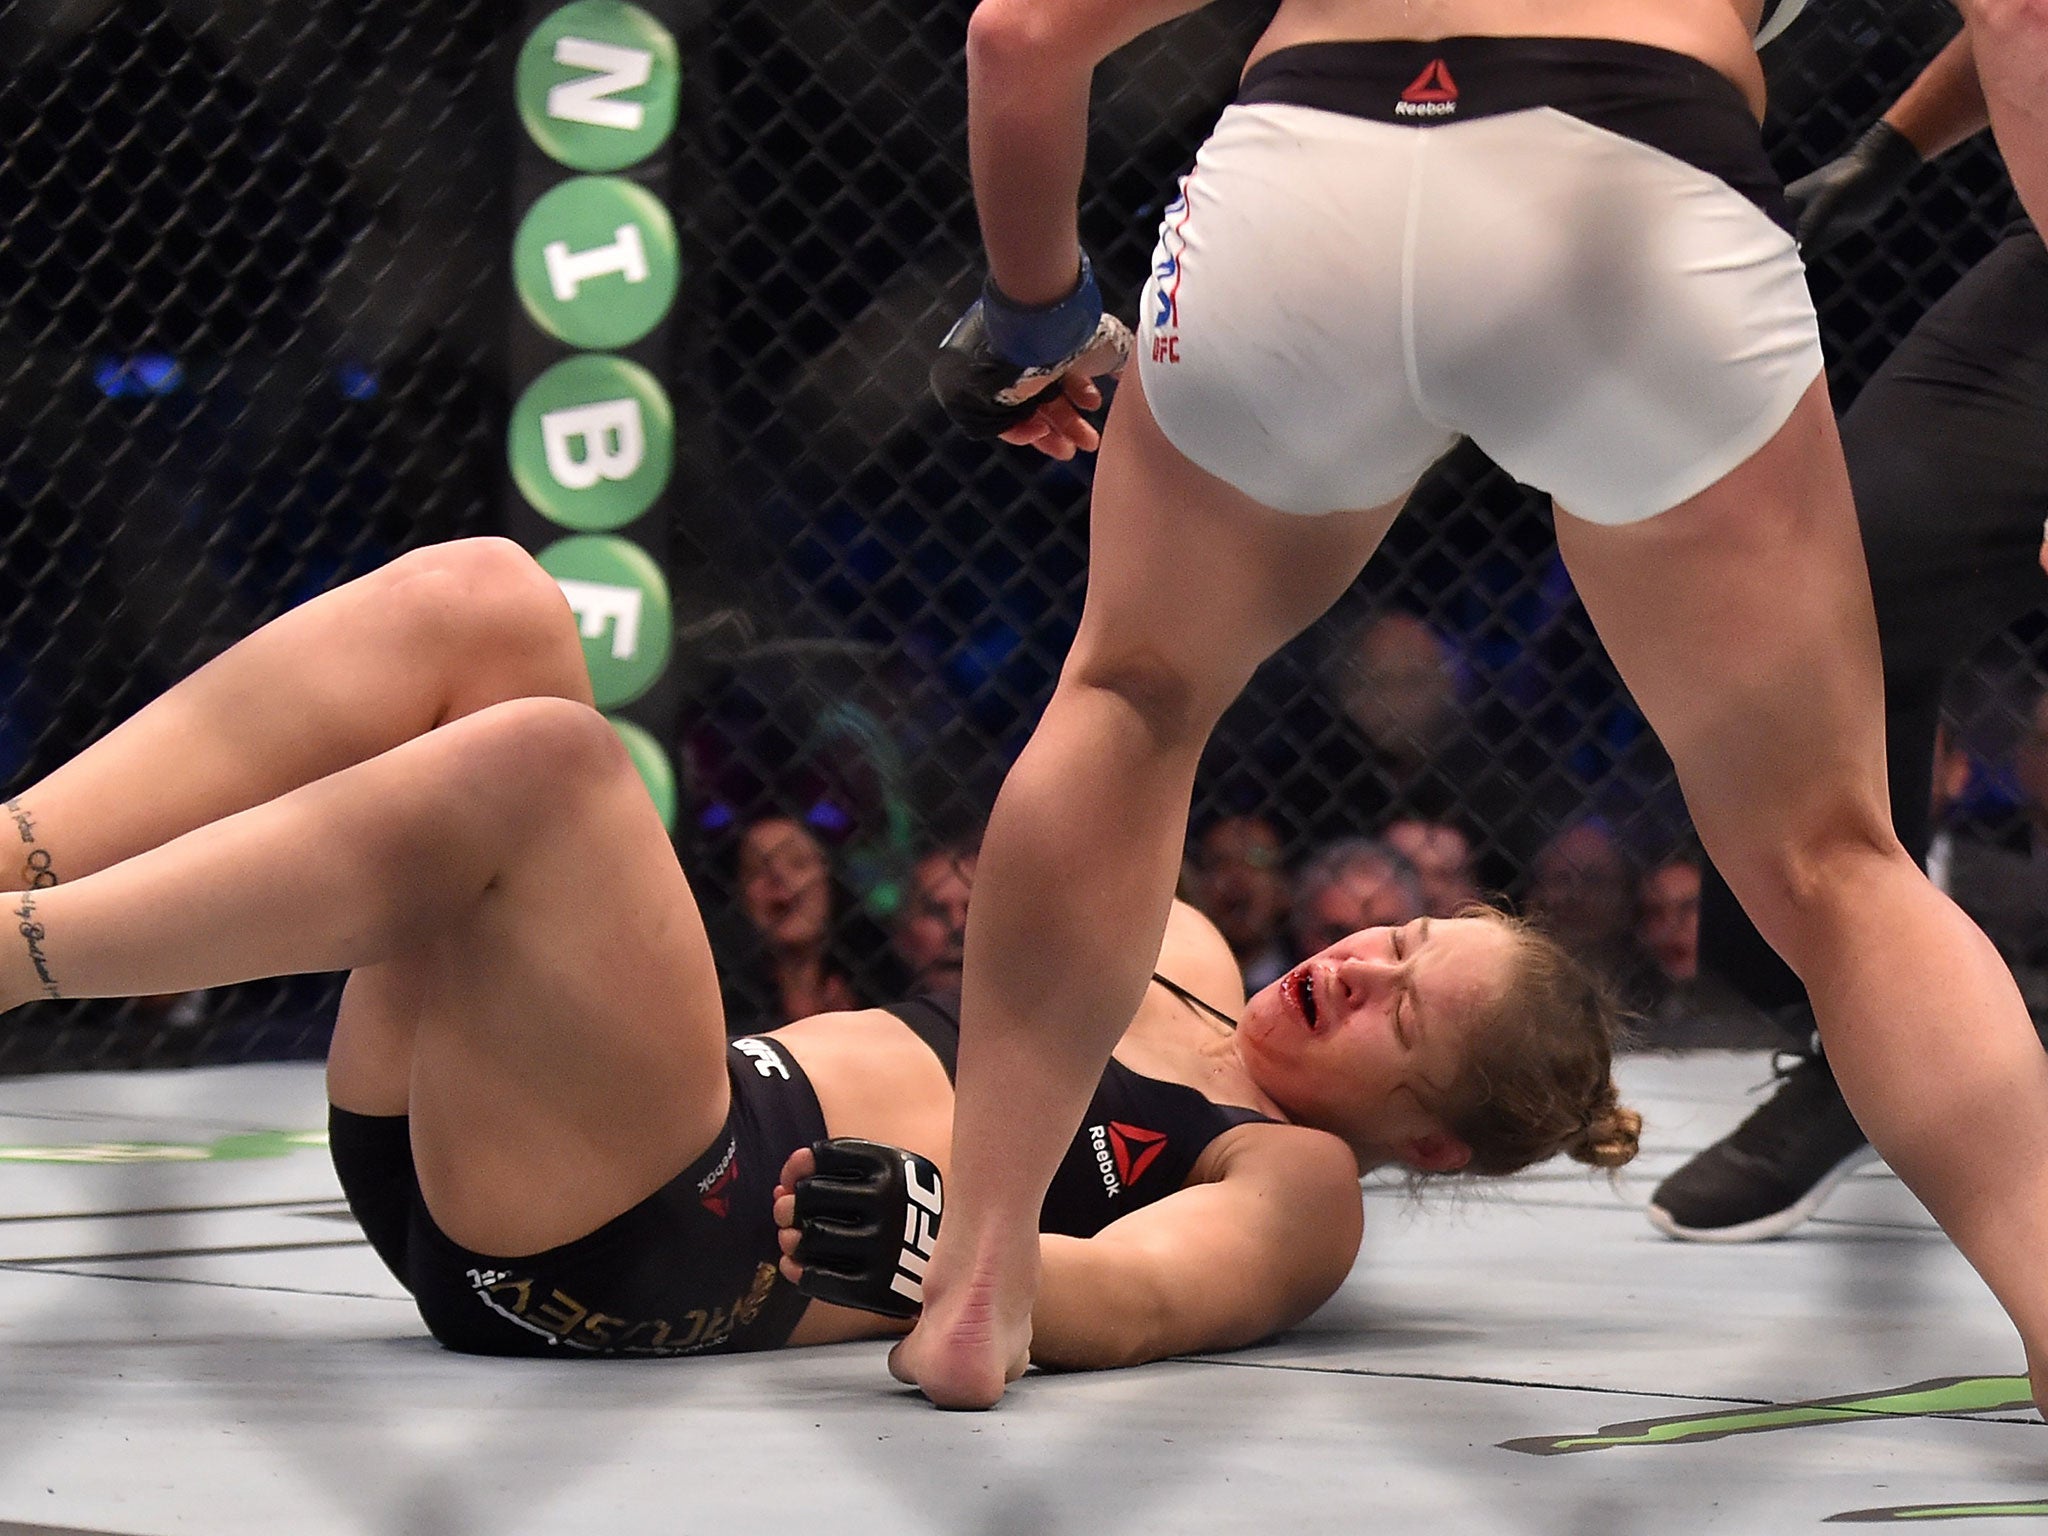 Ronda Rousey fights for the first time since UFC 193 in November last year